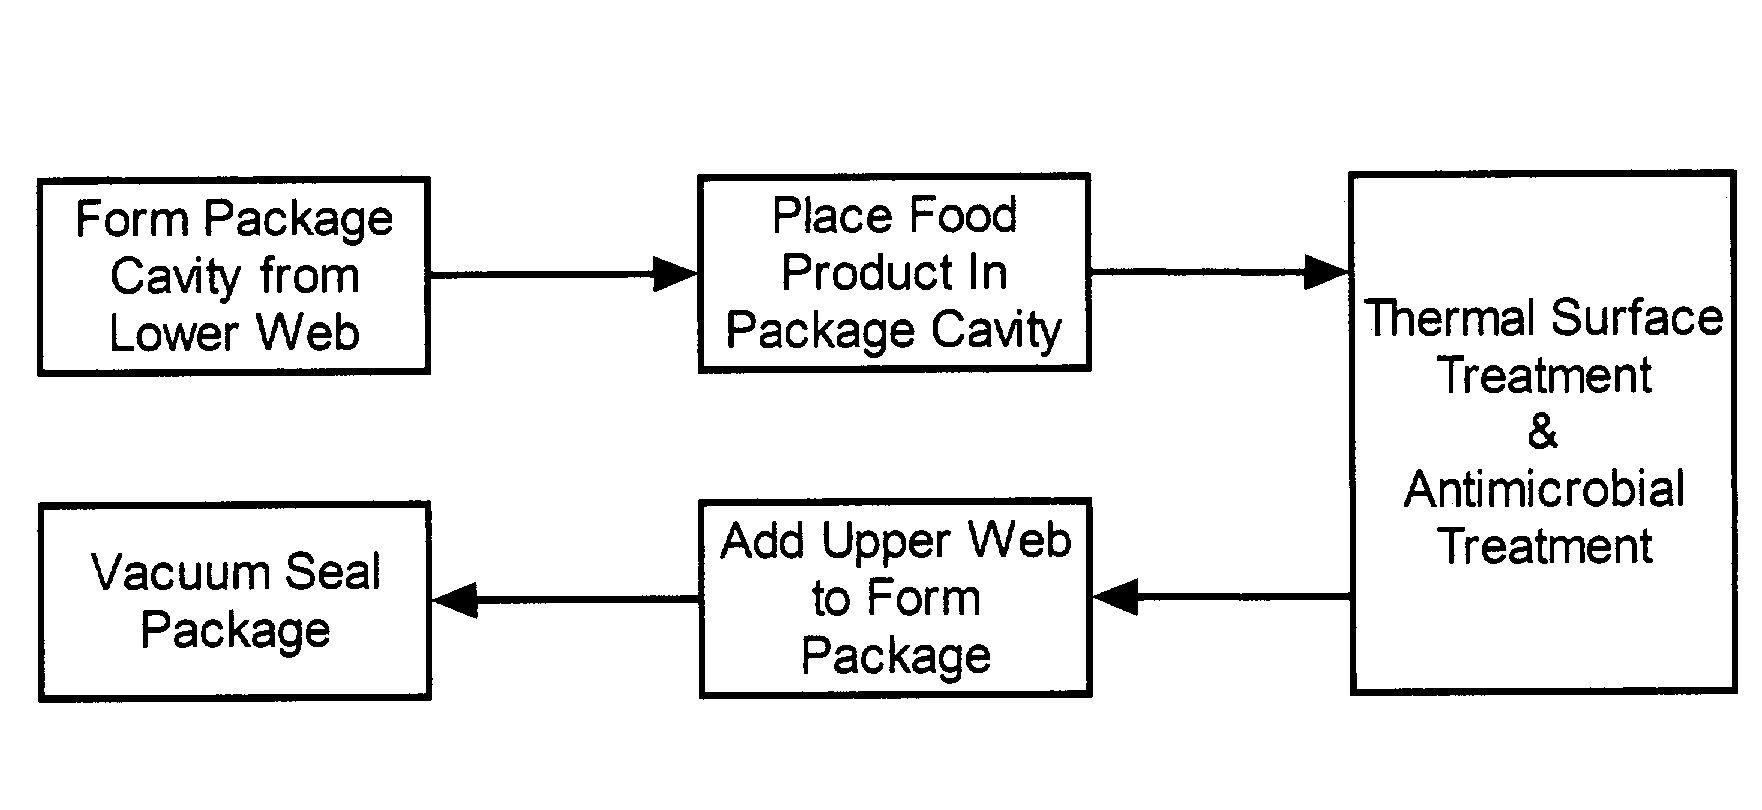 Method for controlling microbial contamination of a vacuum-sealed food product